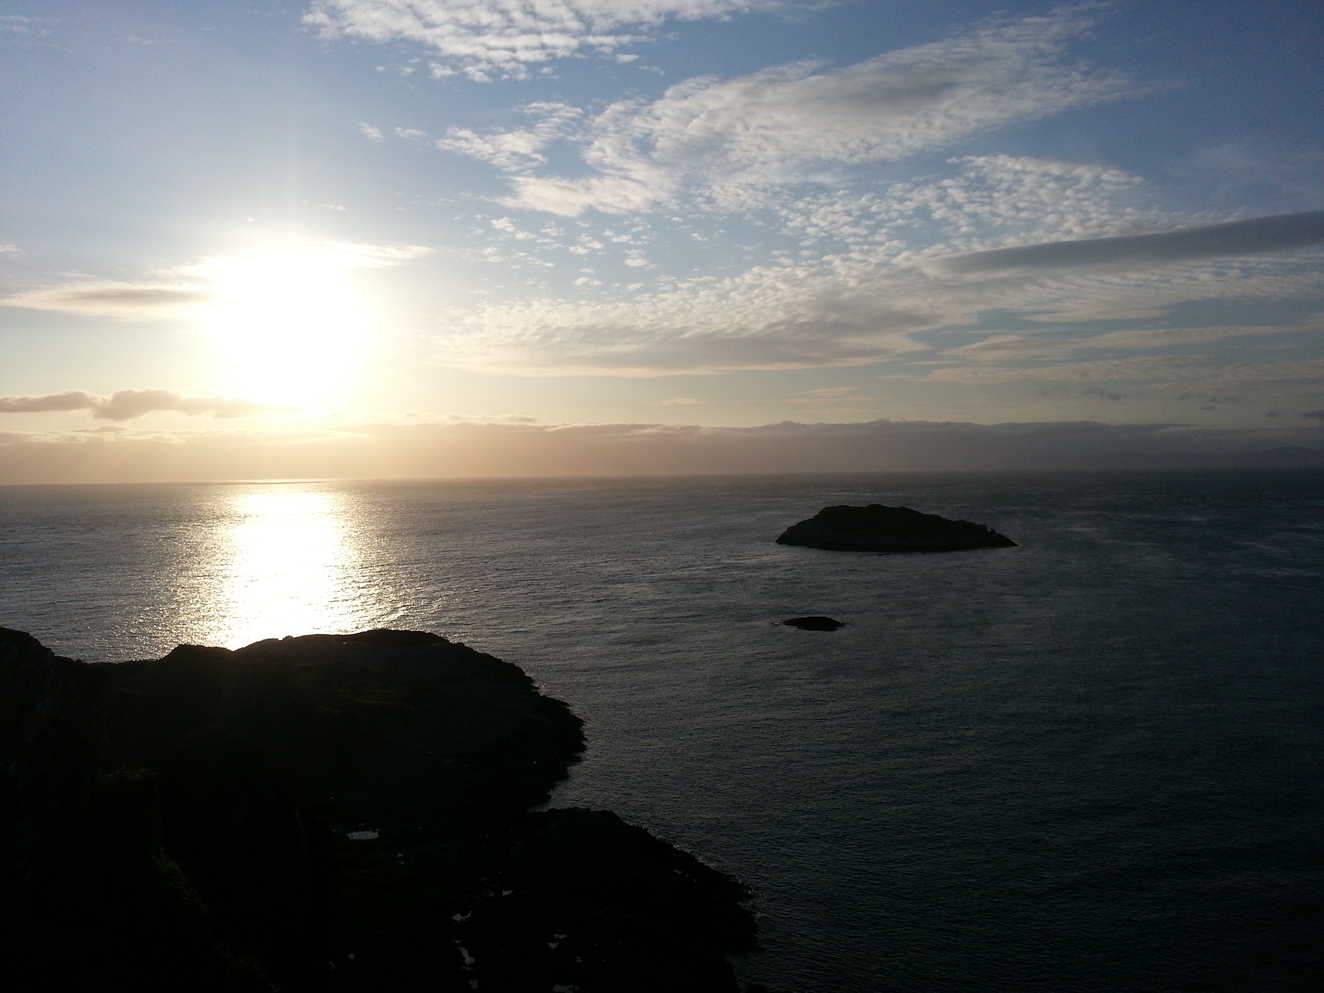 Sunset over the Corryvreckan